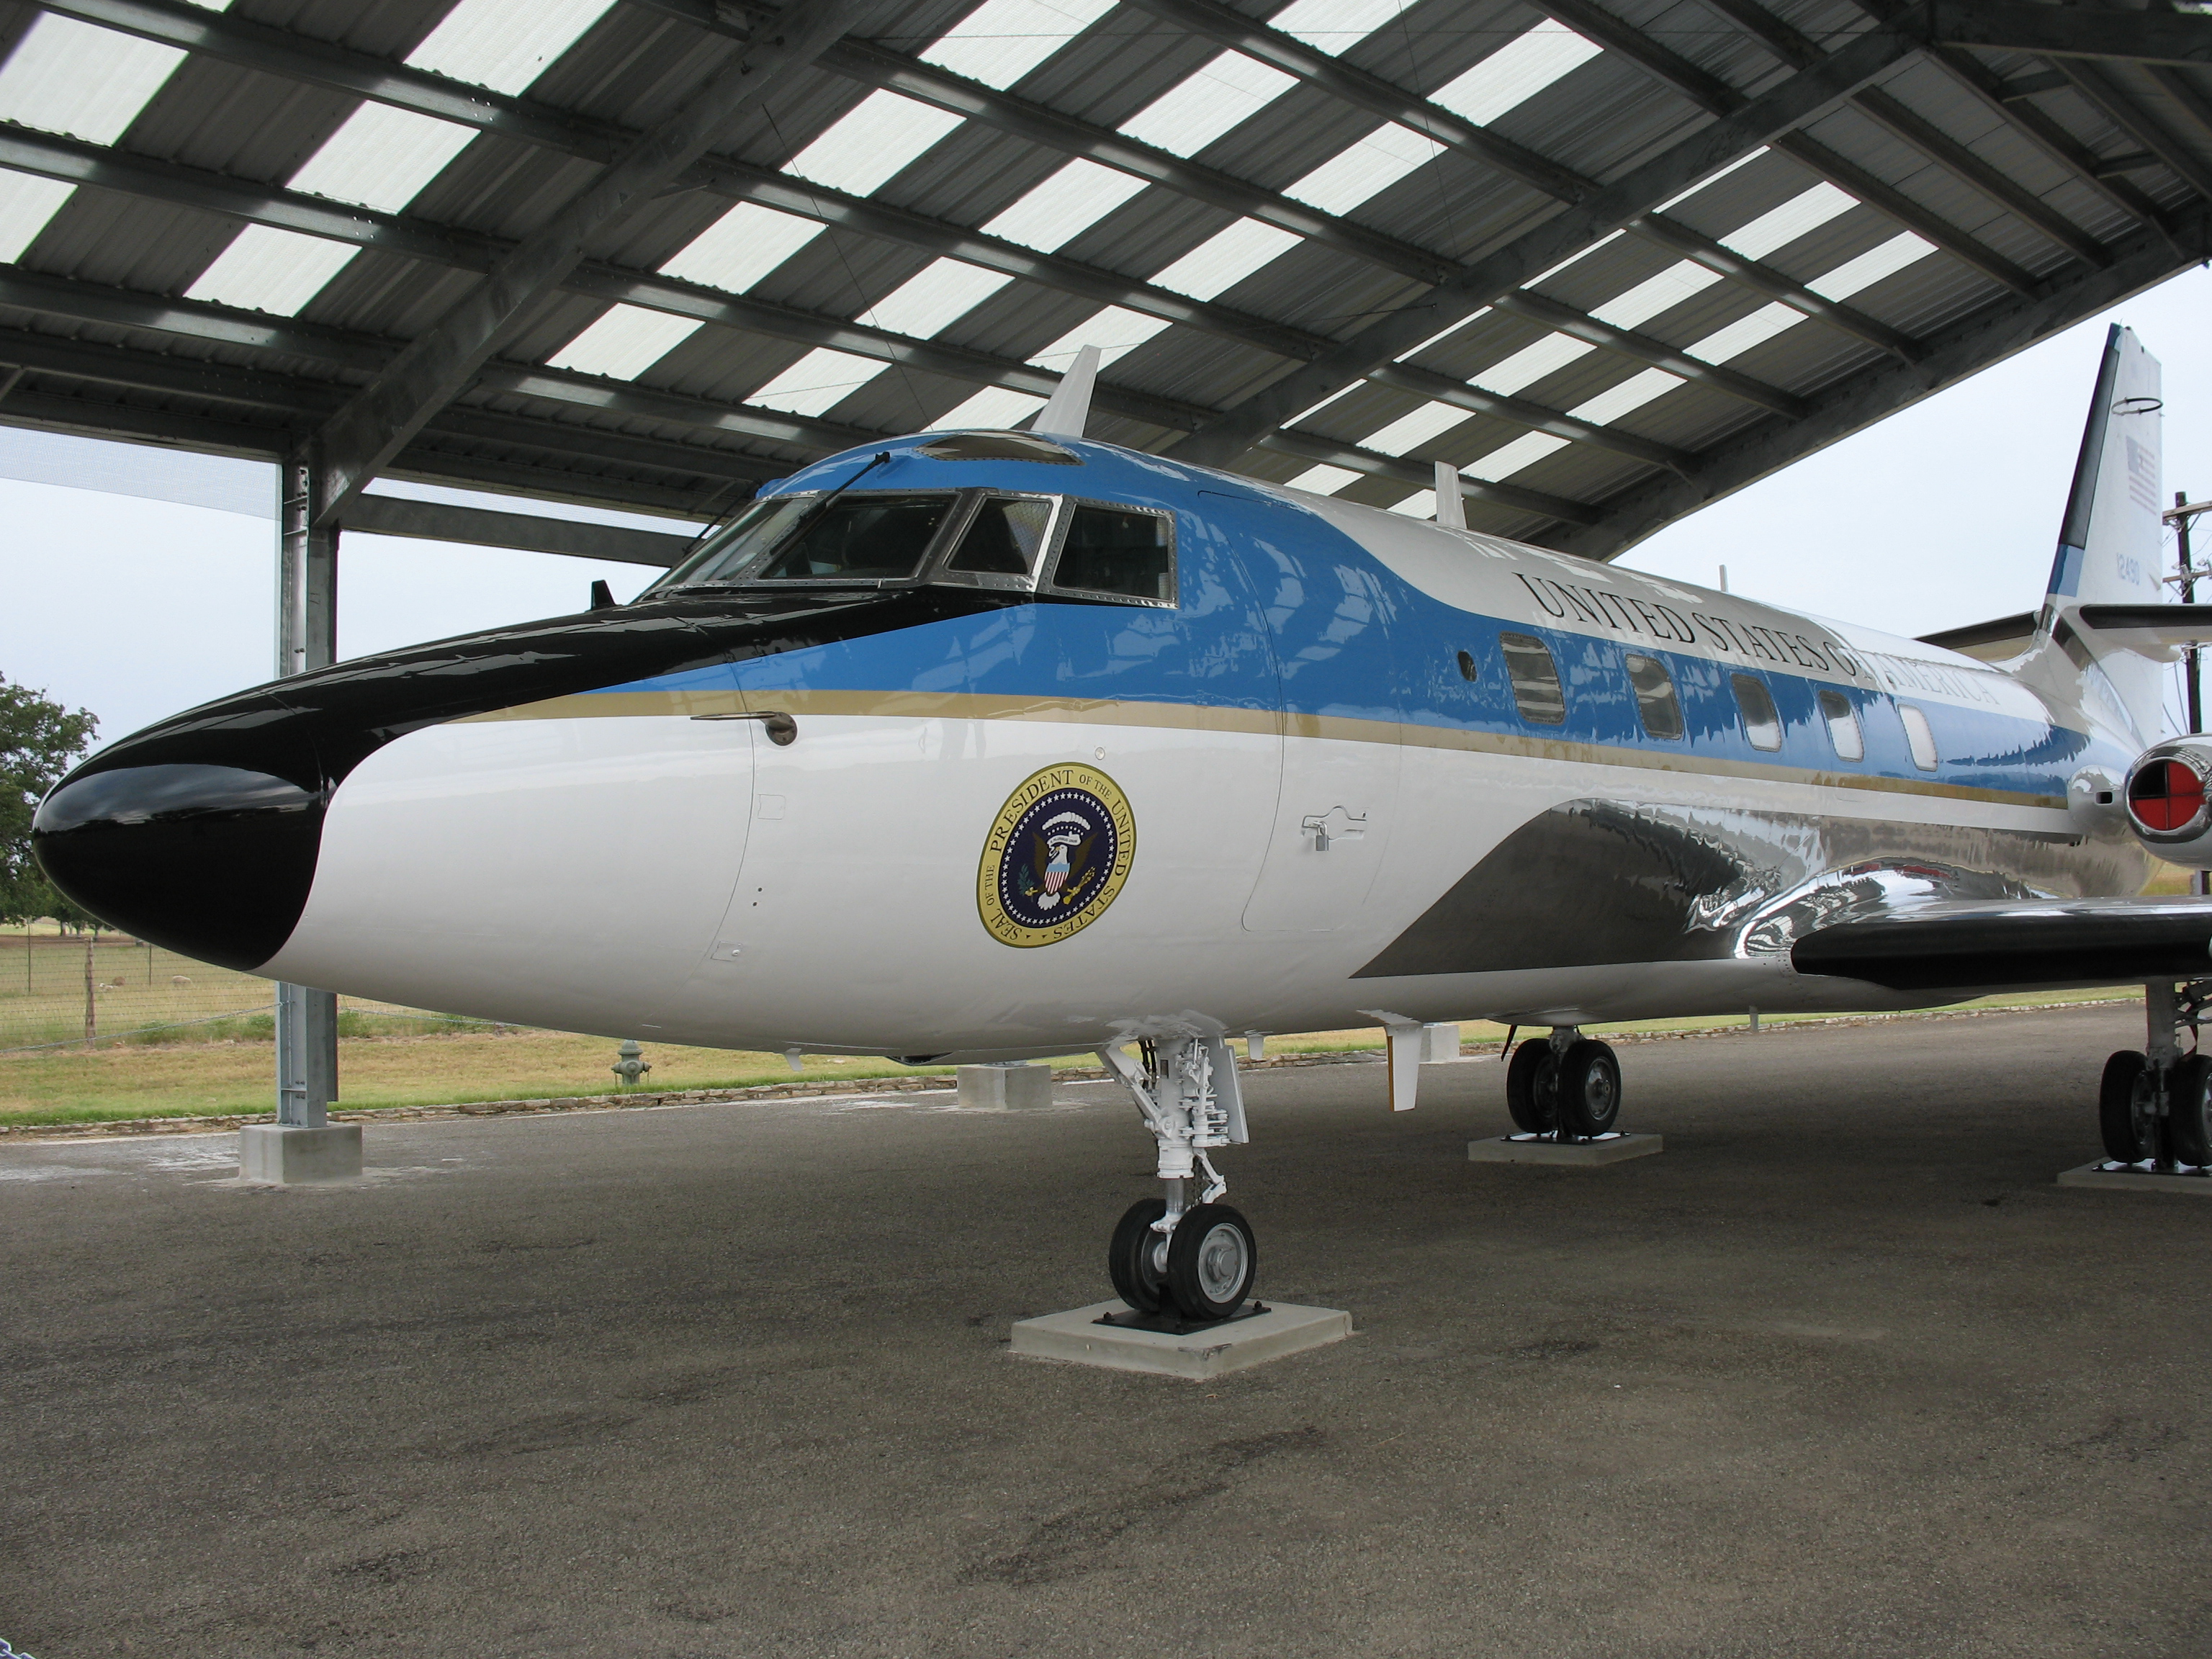 An exterior view of a White and blue jet with presidential seal painted just below the cockpit.